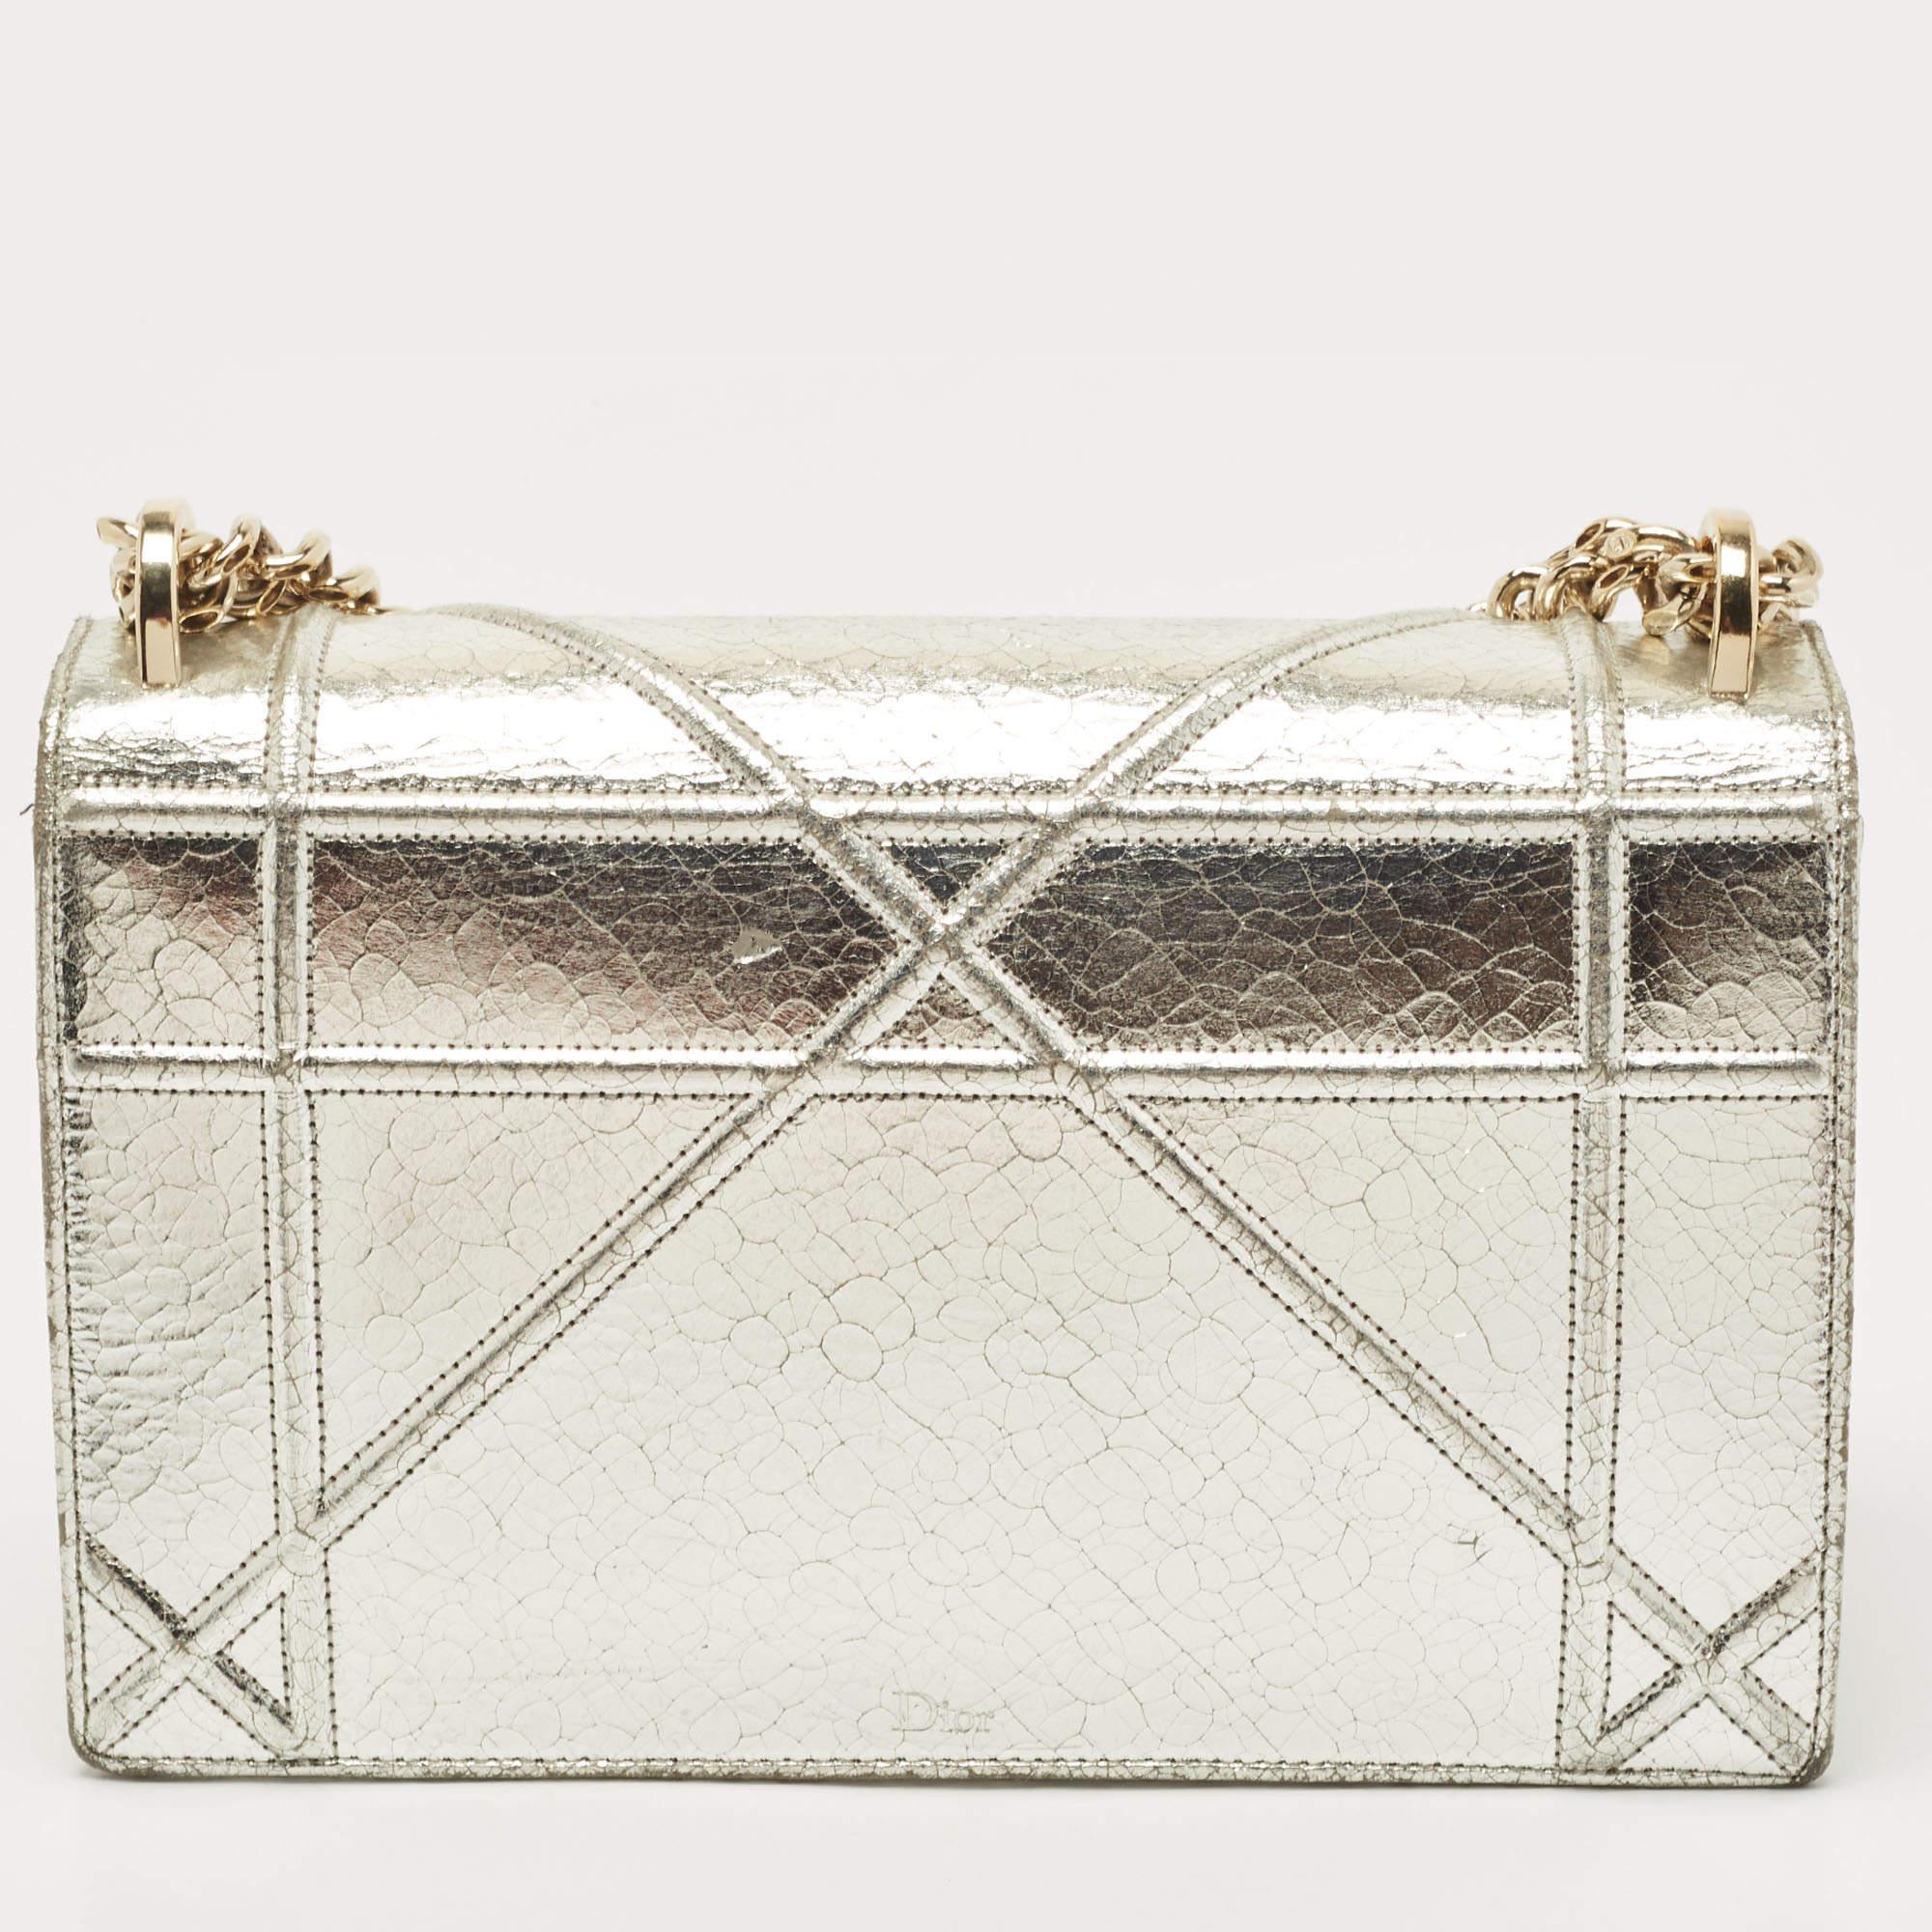 Introduced in Spring/Summer 2015 runaway, the Diorama embodies refined construction and celebrates femininity through its artistic design. The signature Cannage pattern brings out the appeal of this Dior bag. Made from leather, the chain-leather